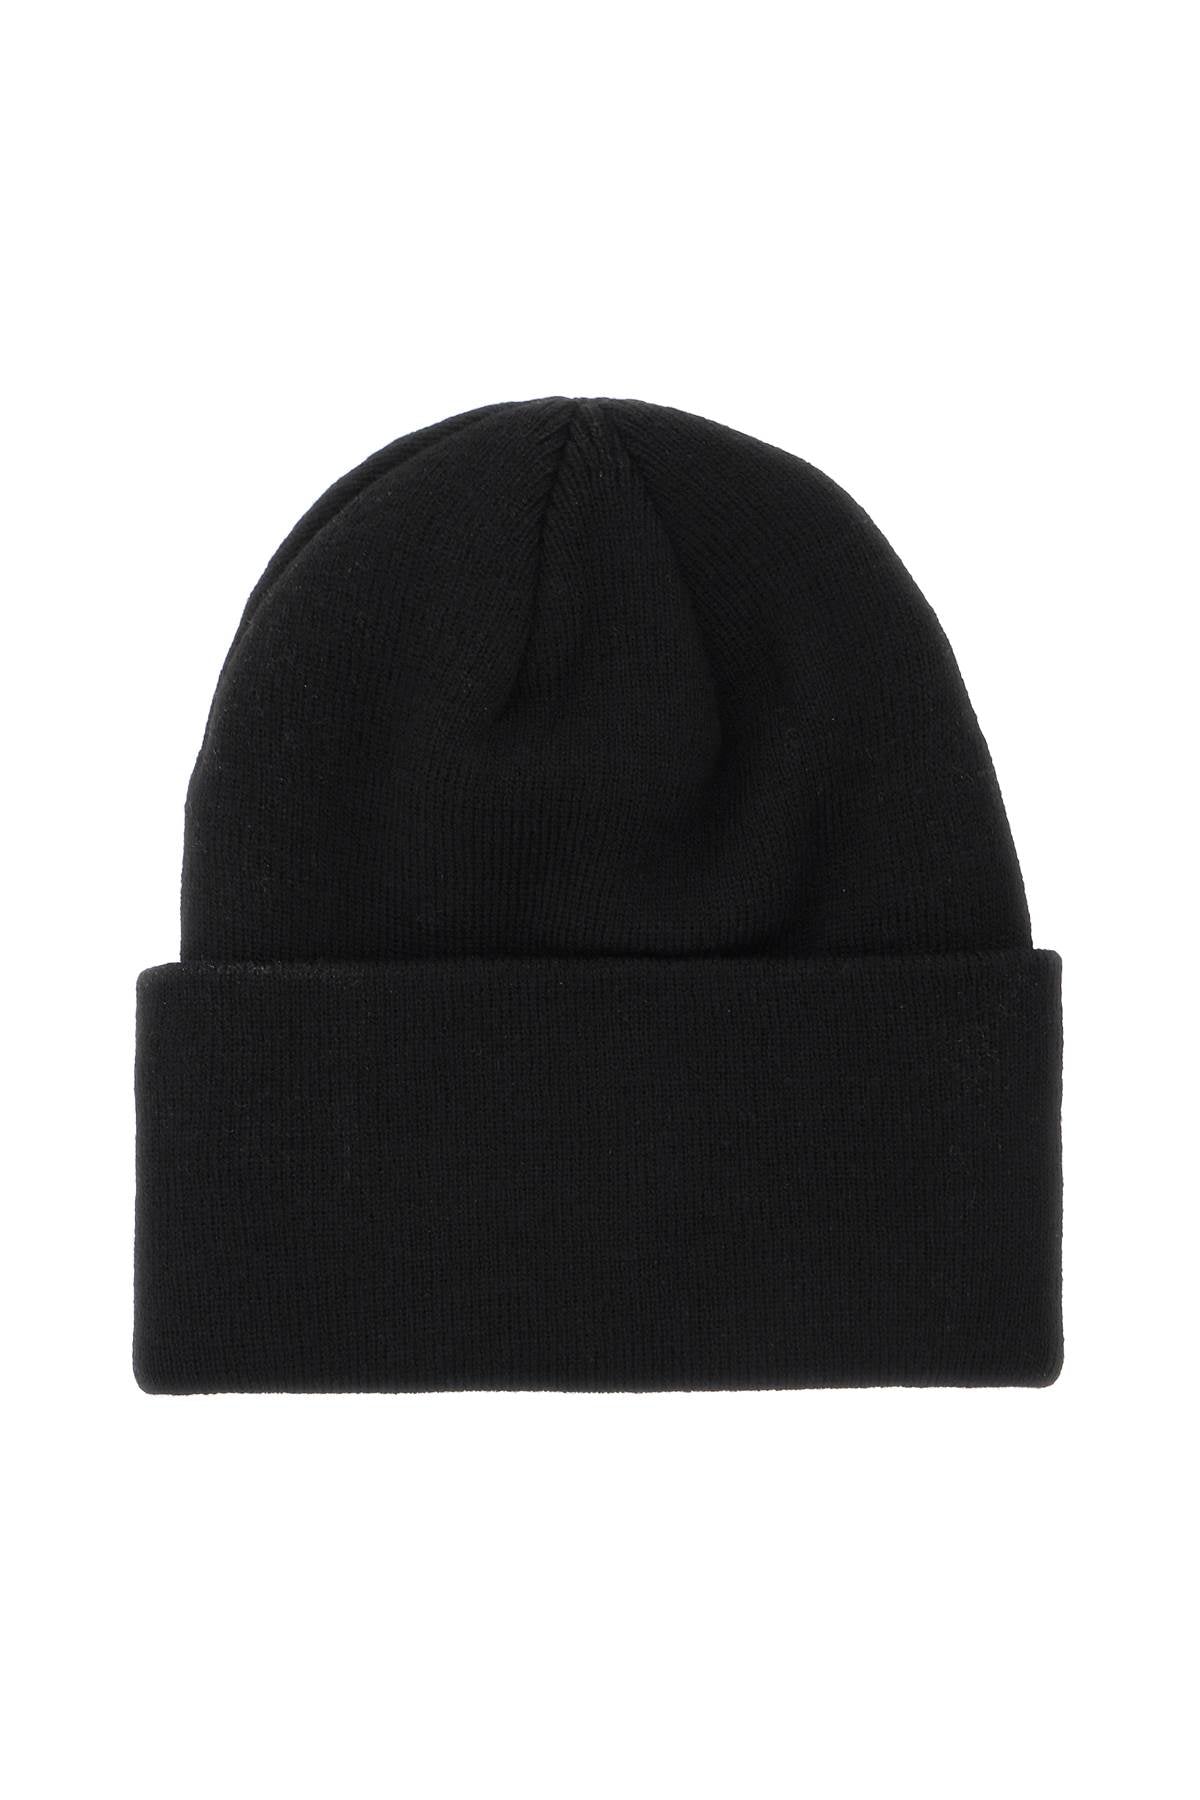 Rotate Rotate beanie hat with logo patch